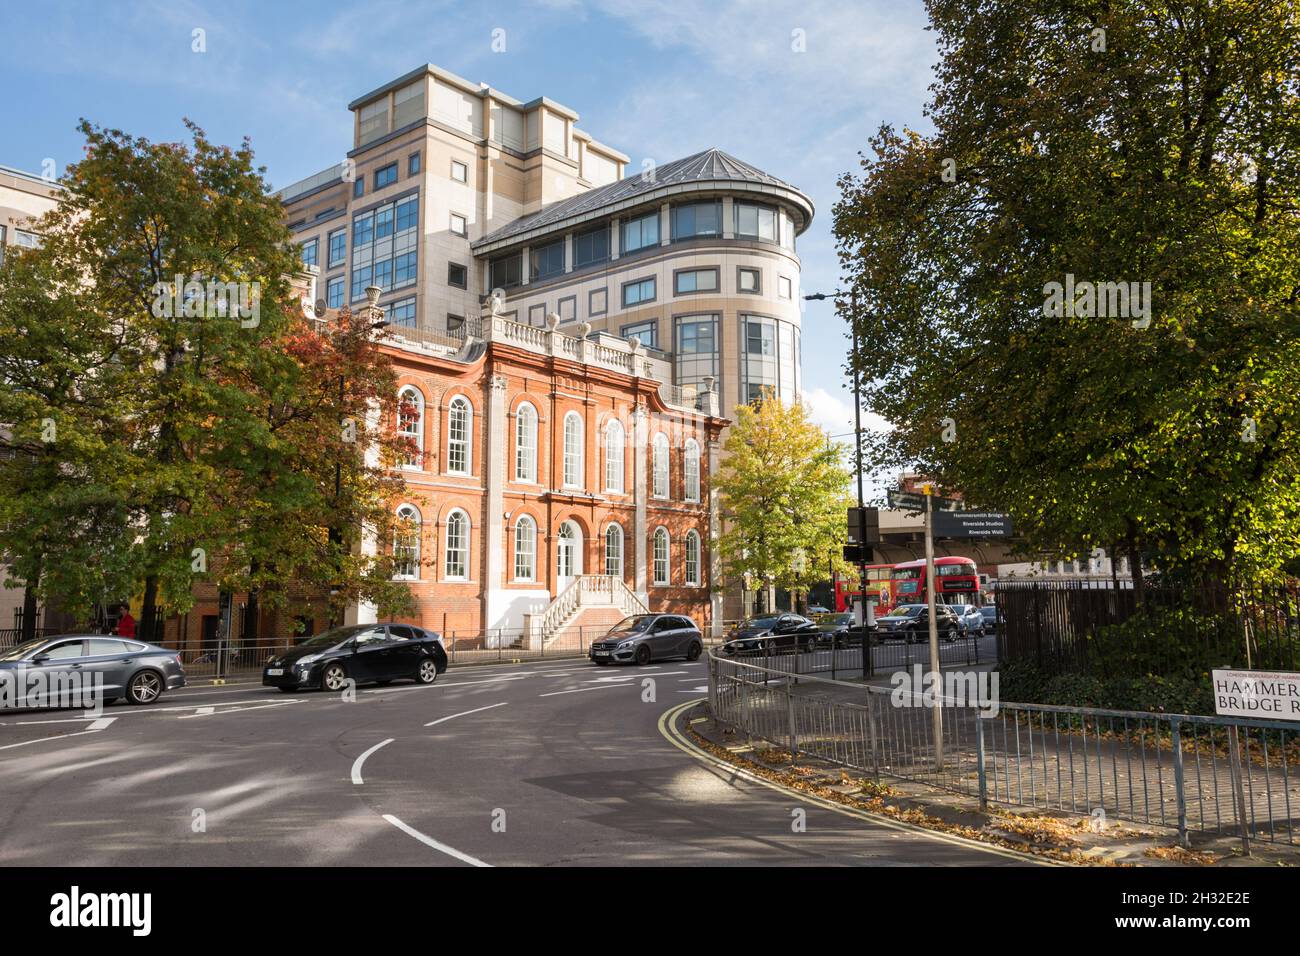 Traffic congestion in front of Bradmore House, Queen Caroline Street, Hammersmith, London, W6, England, UK Stock Photo